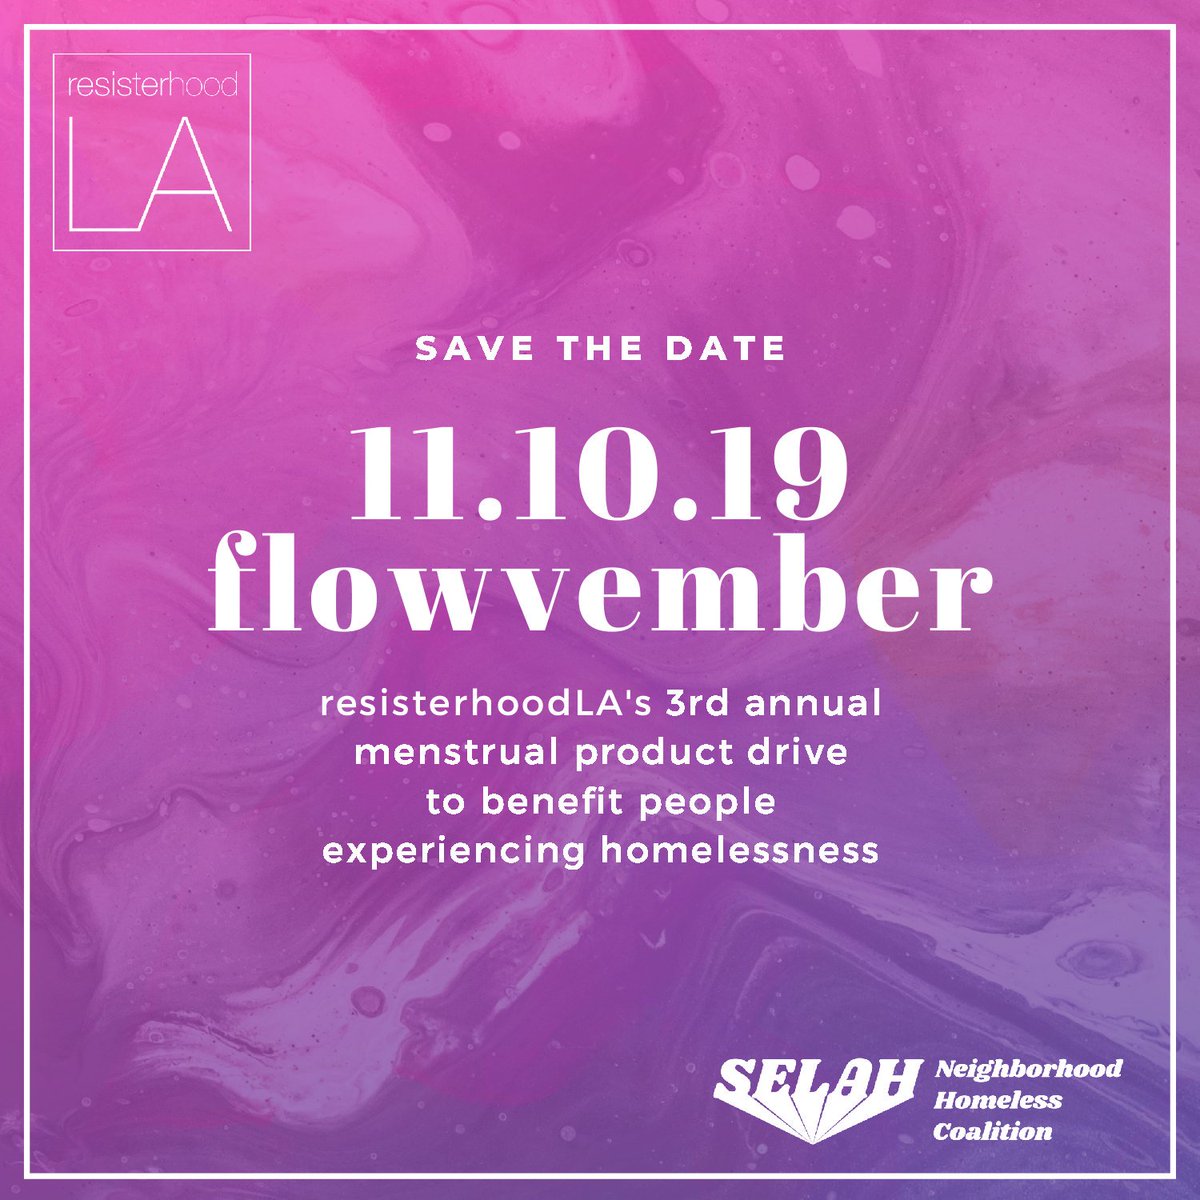 Our 3rd annual #FLOWvember is Sunday, 11/10. We’ll be packing hygiene kits for @selahnhc!

Sign up for our newsletter for updates resisterhoodLA.org/subscribe 💕

#periodequity #menstrualequity #endhomelessness #menstrualmovement #periodpoverty #periodmovement #happyperiod